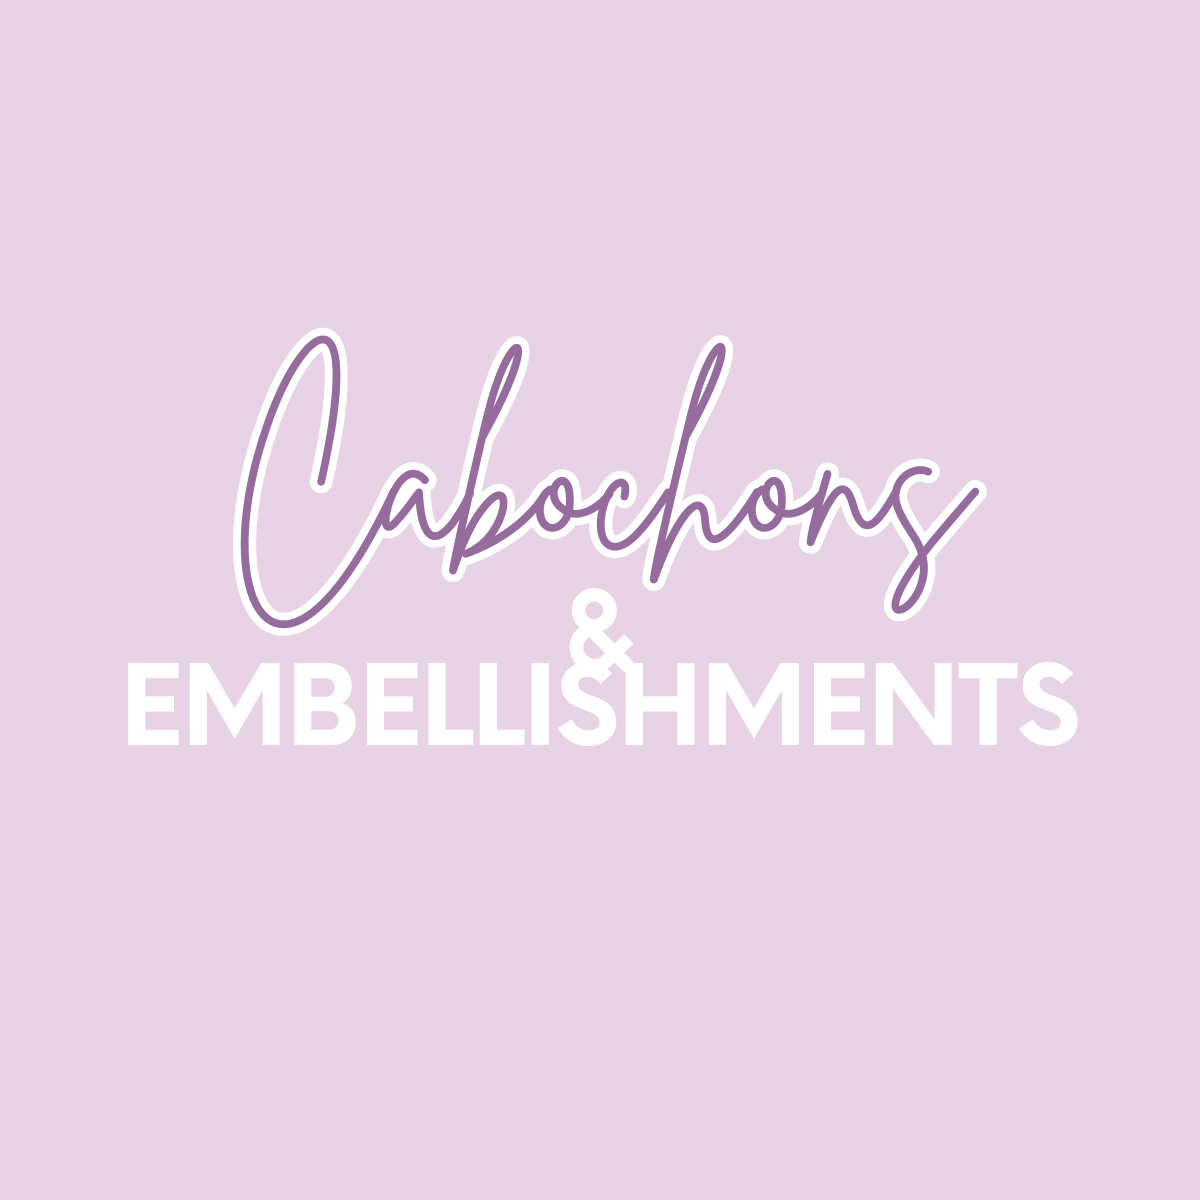 Cabachons, Charms & Embellishments